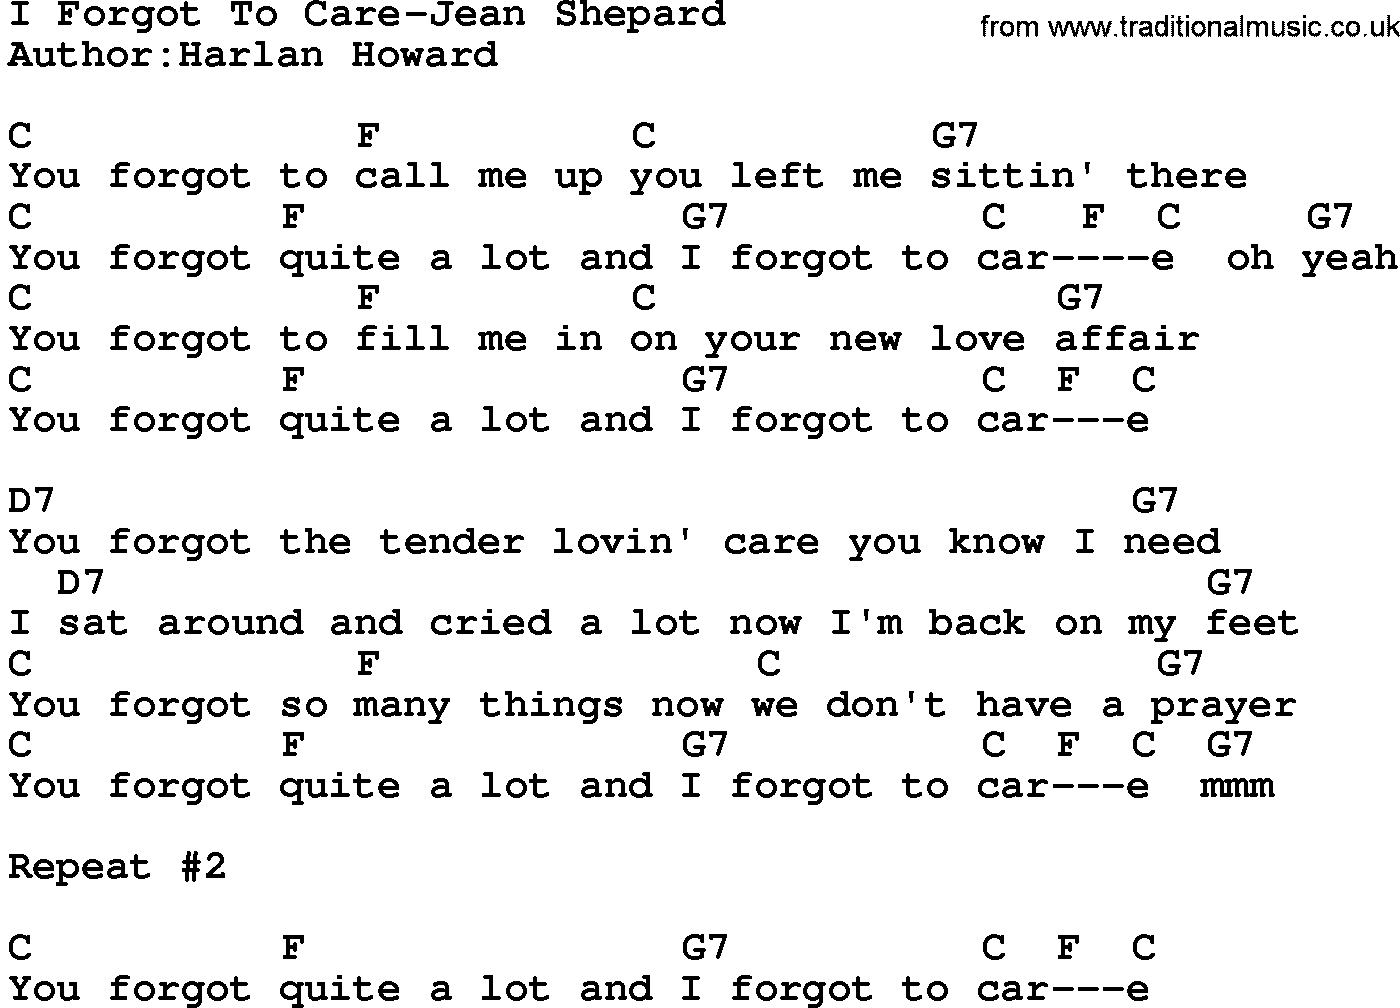 Country music song: I Forgot To Care-Jean Shepard lyrics and chords